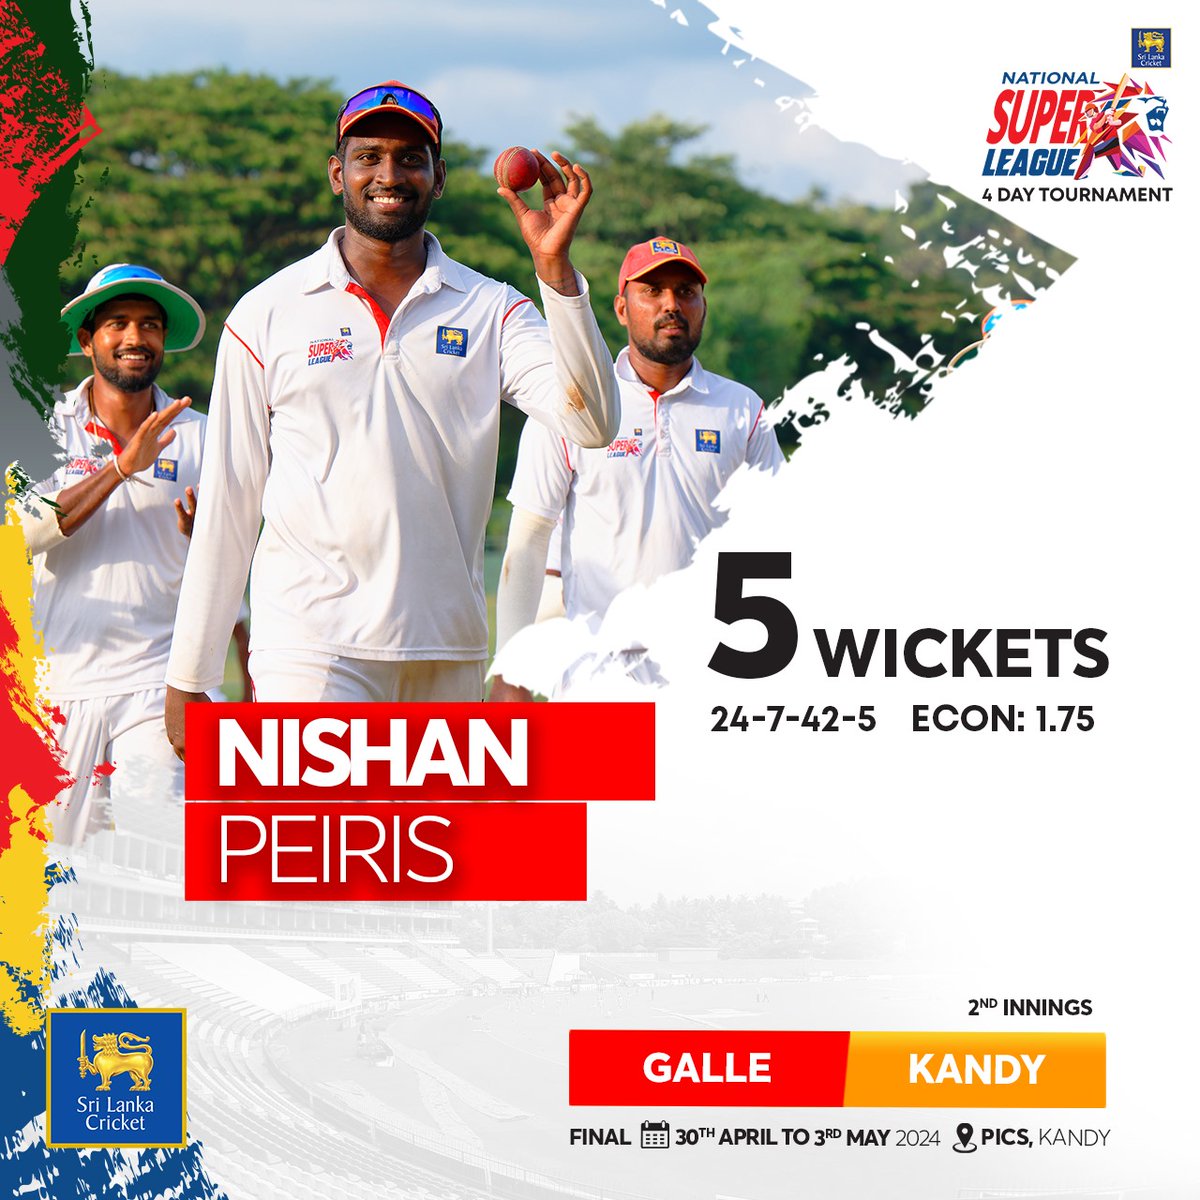 Nishan Peiris on FIRE🔥 Picks up a fifer to dismantle Kandy for just 163 in the second innings! 

📝Scorecard: shorturl.at/cAOR2

#NSL4Day #SriLankaCricket